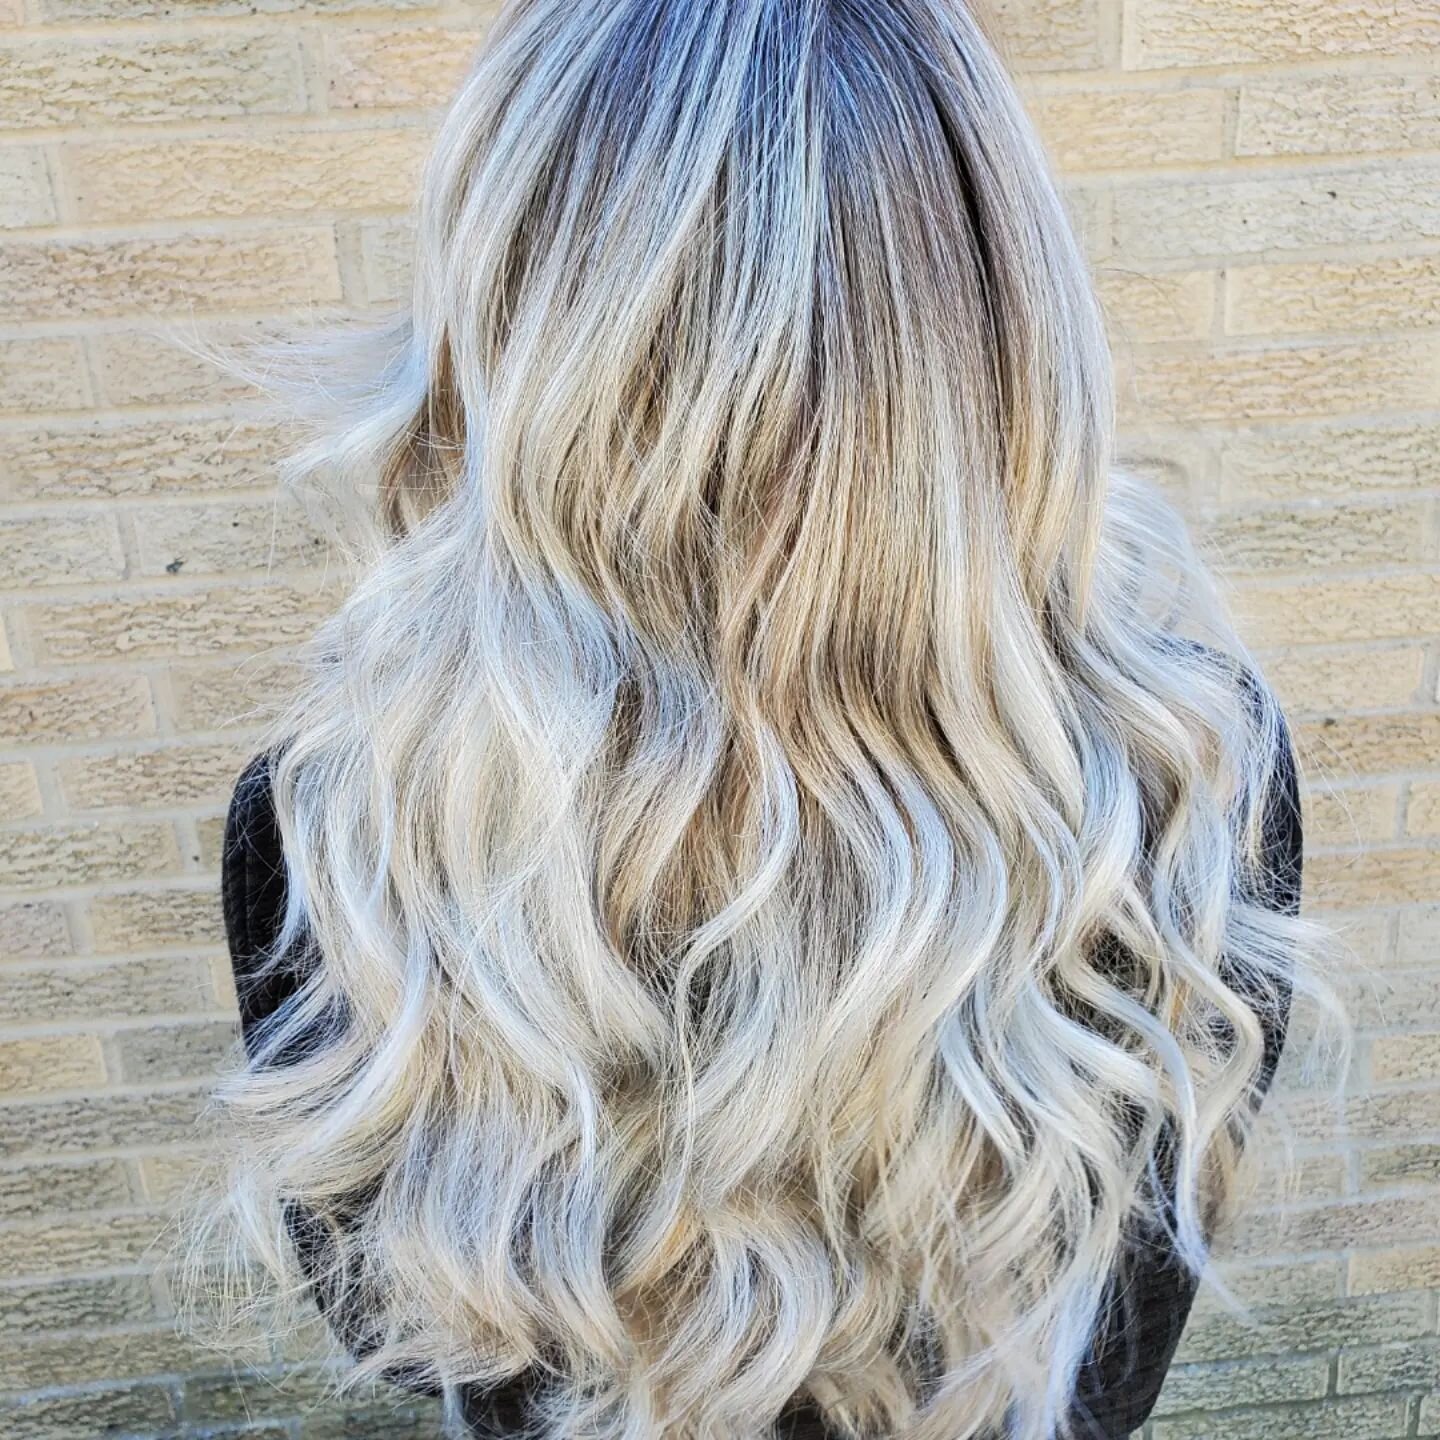 ✨️✨️Check out these summer vibes✨️✨️ 
Are you ready?? Schedule online at Itssoyousalon.com or call 440-457-7466 for an appointment 💗

#summervibes #summerready #springisinthehair🌸 #areyouready #salonlife✂️ #salonowner #callforanappointment☎️ #broad